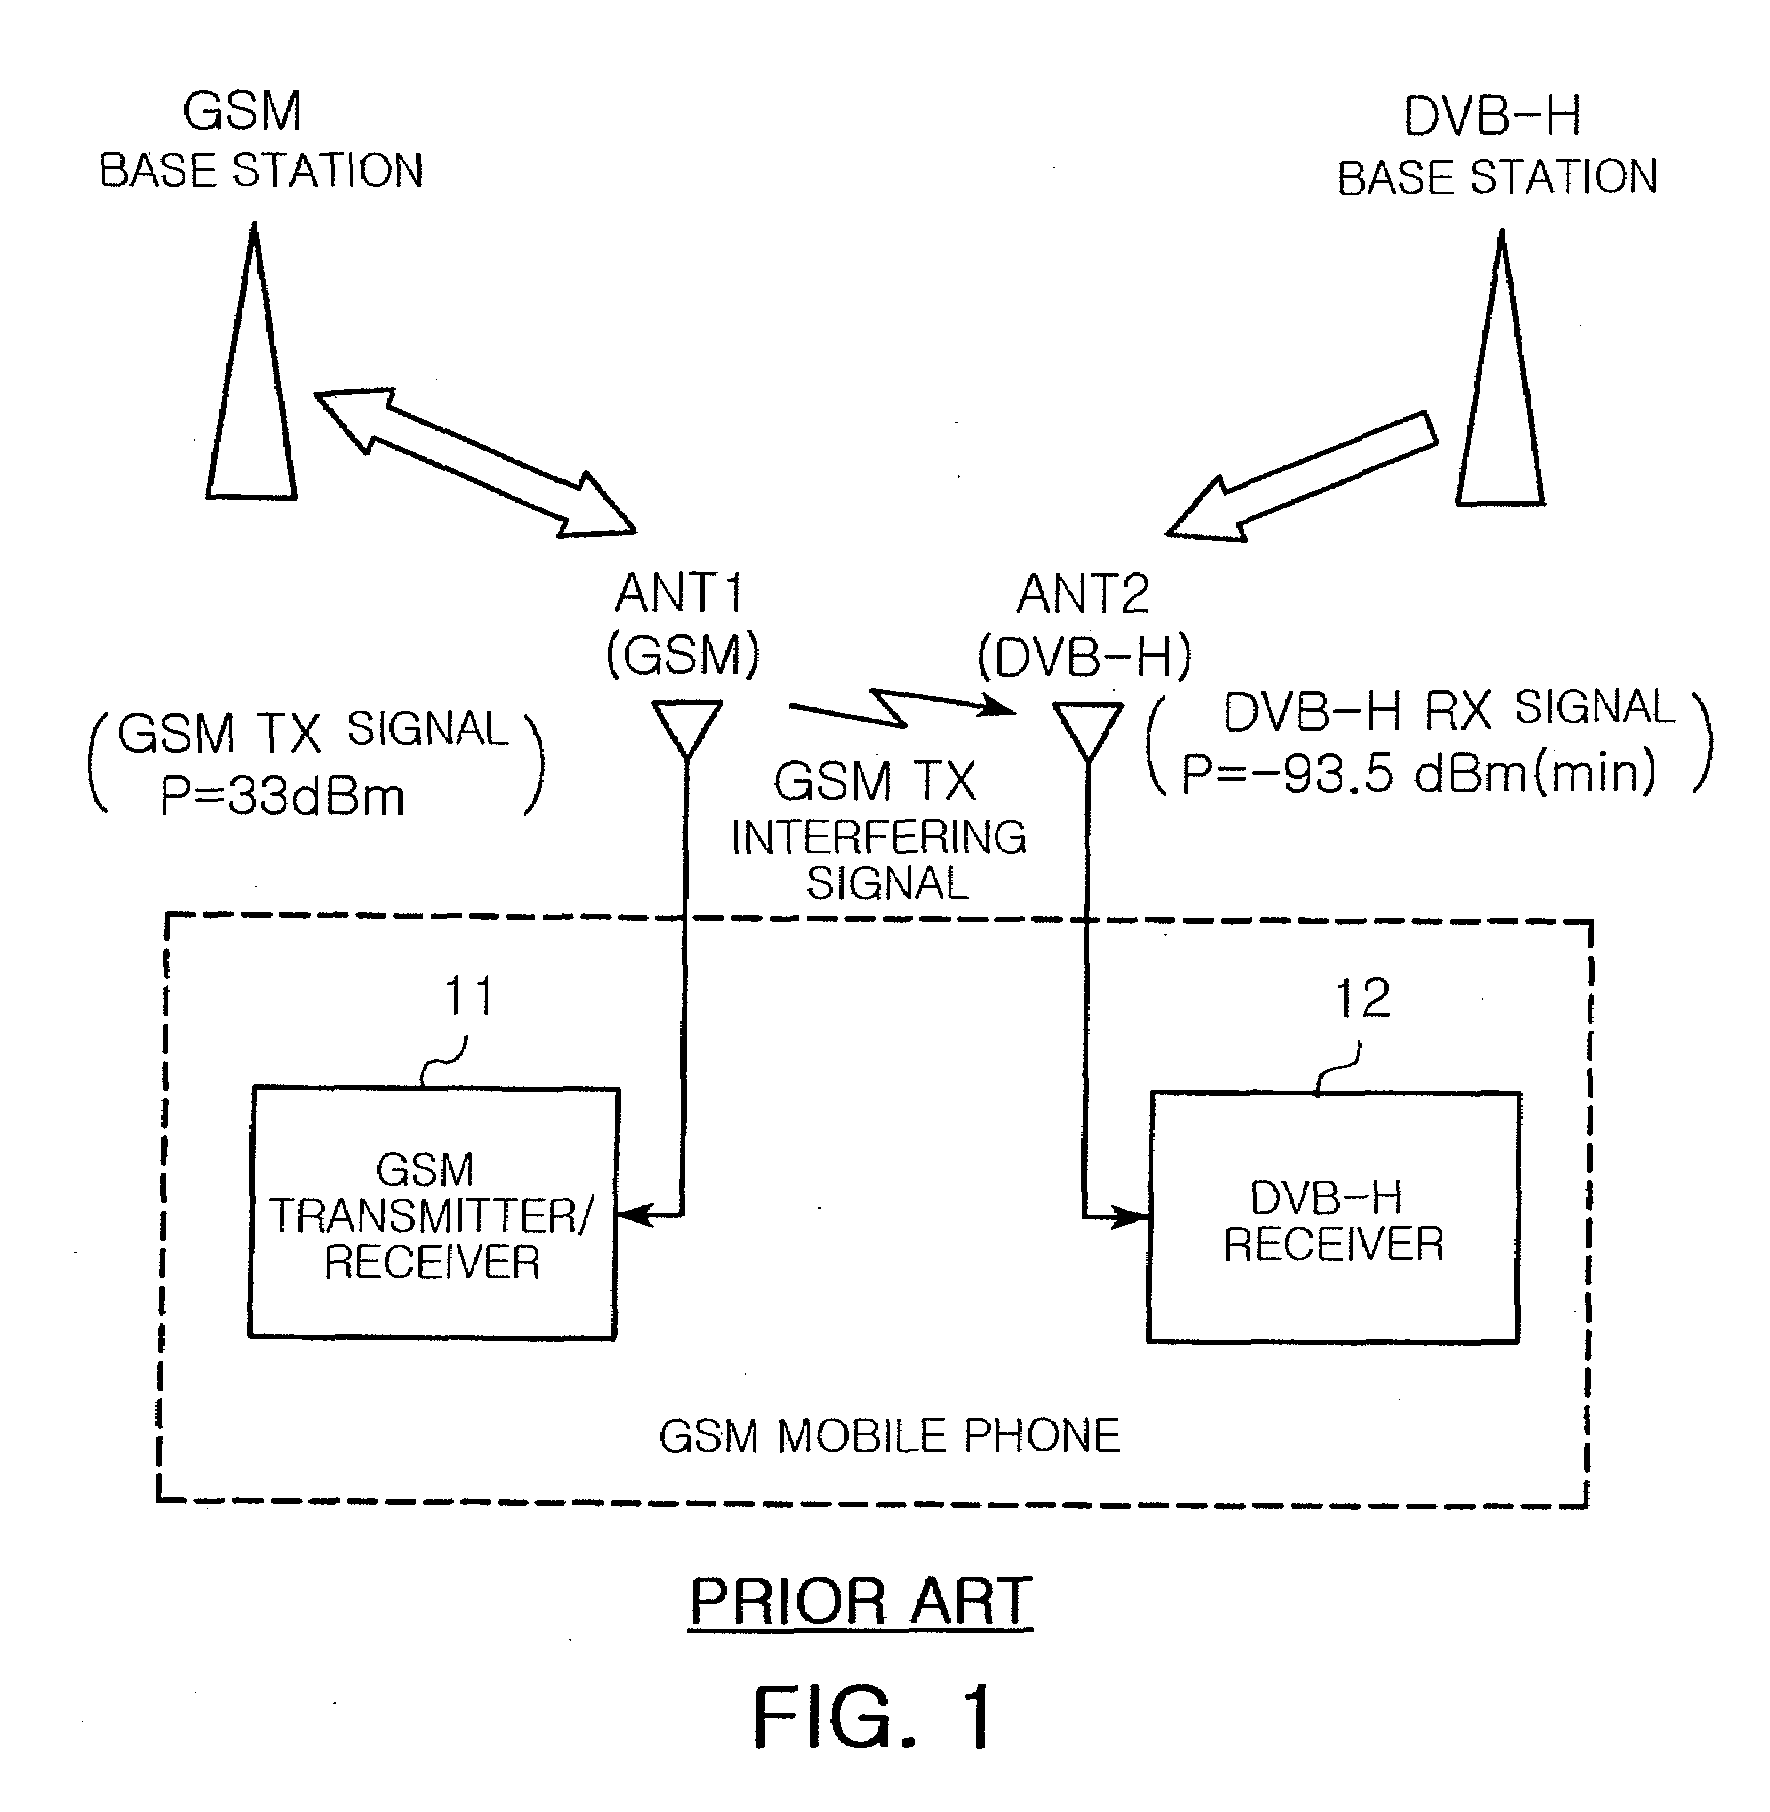 Mobile terminal and method of reducing interfering phase-noise in the mobile terminal